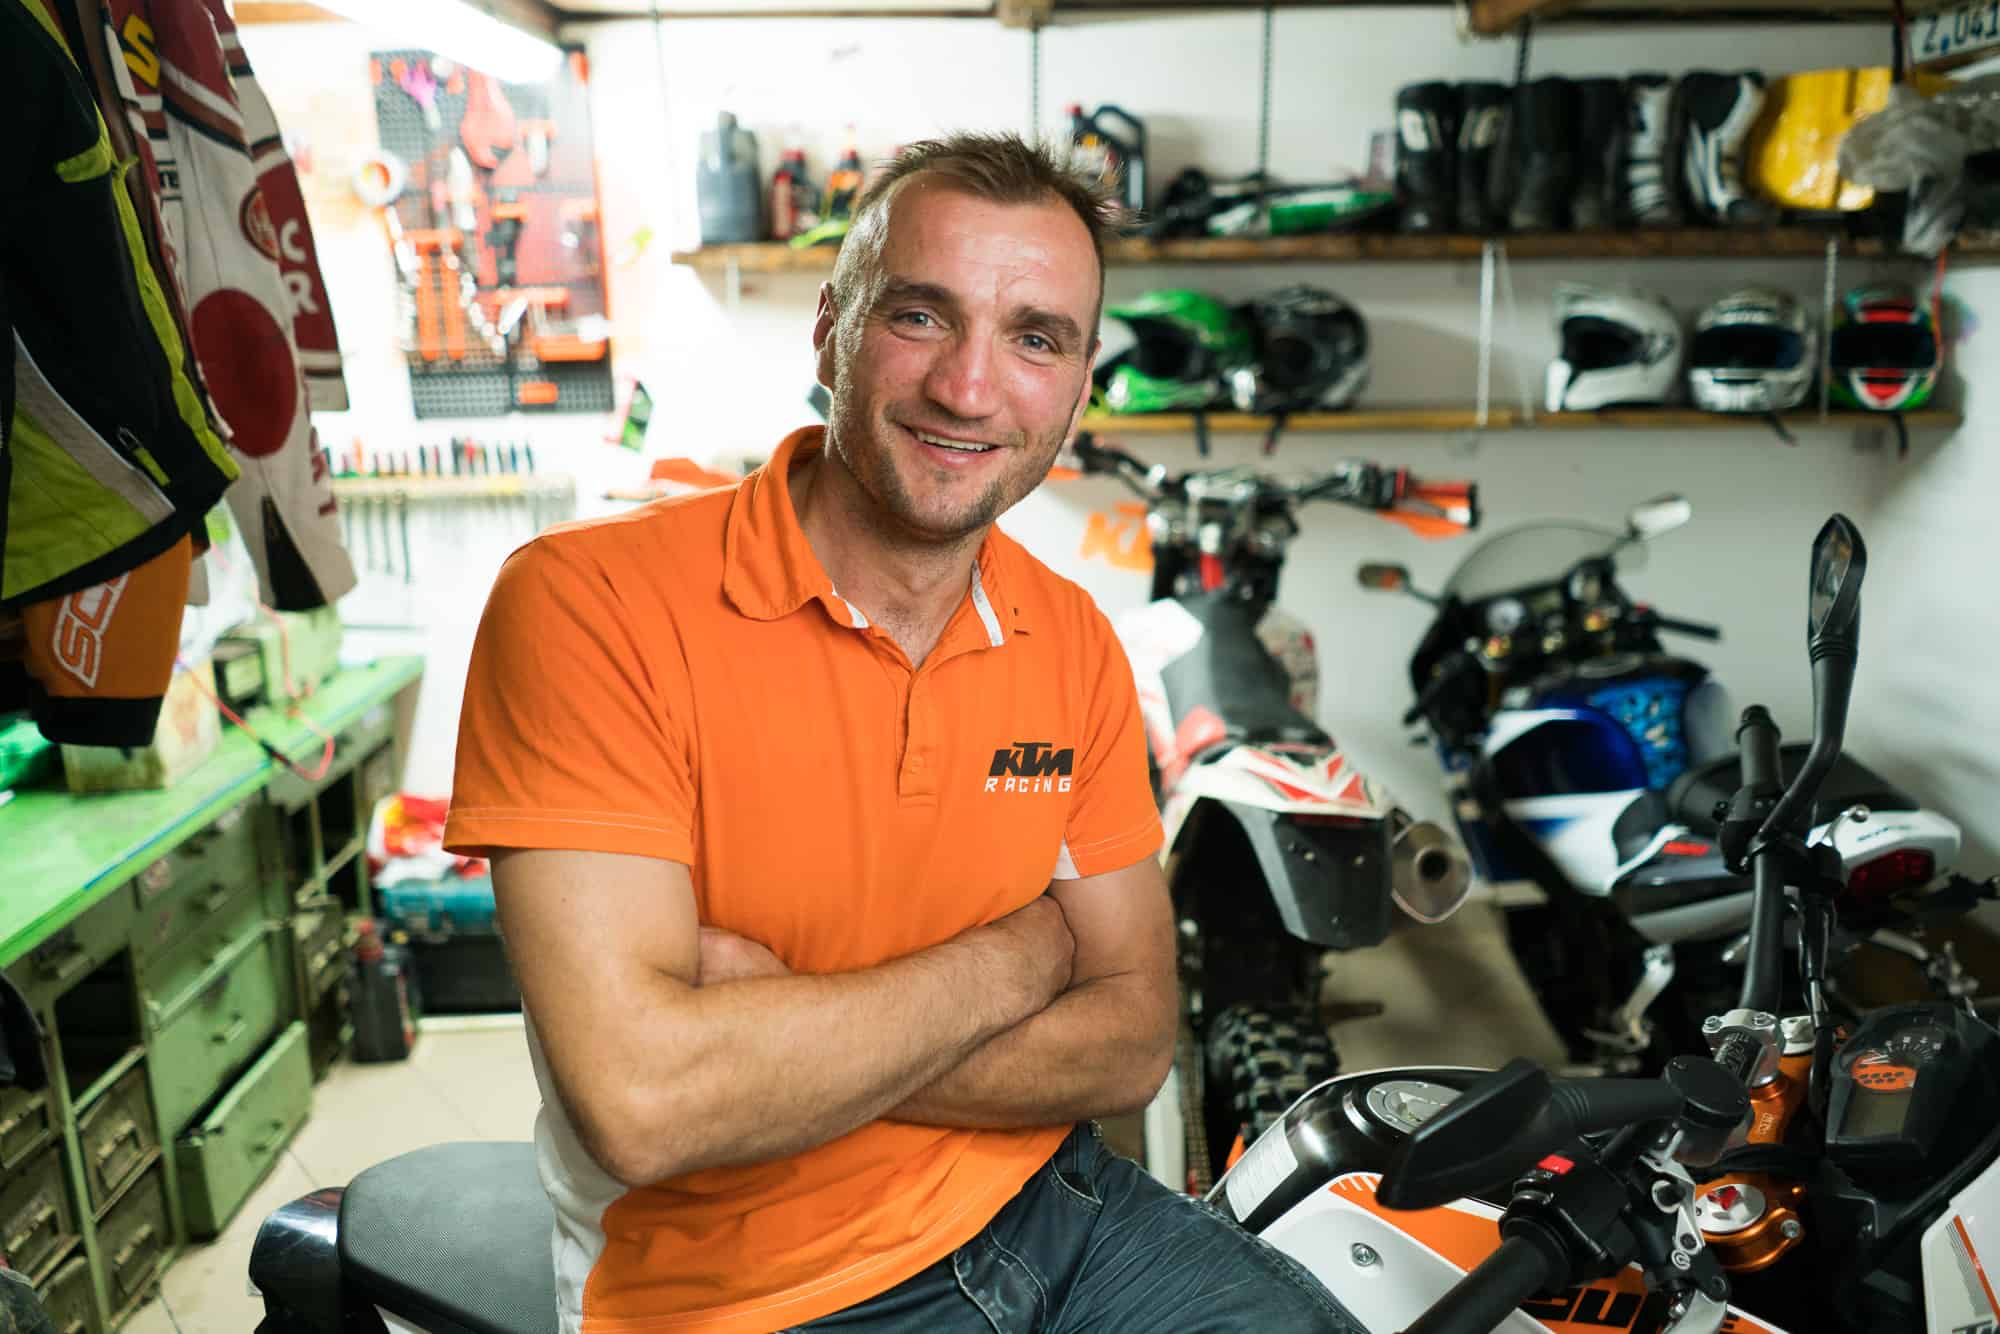 Roman started a motorbike club in order to disciple teenagers through The Greatest Journey.